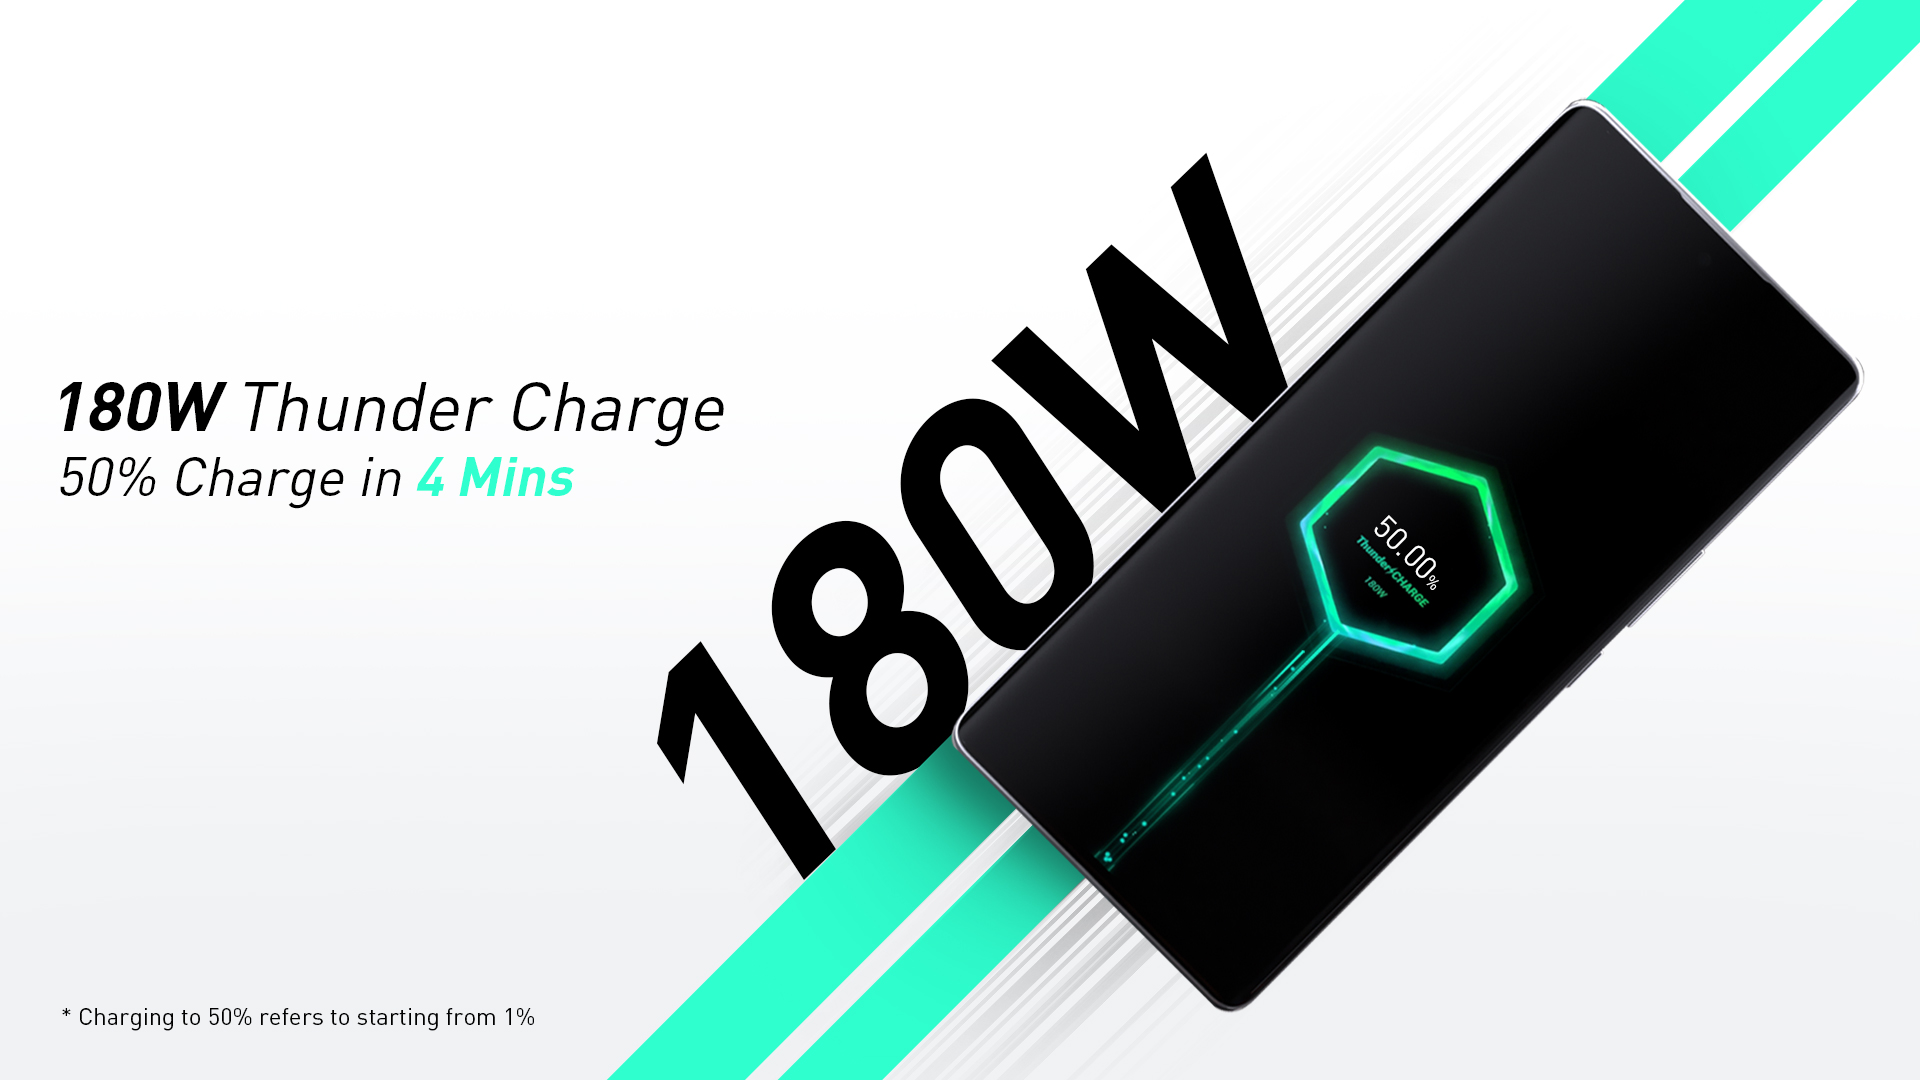 Infinix Announces In-House 180w Thunder Charge Tech